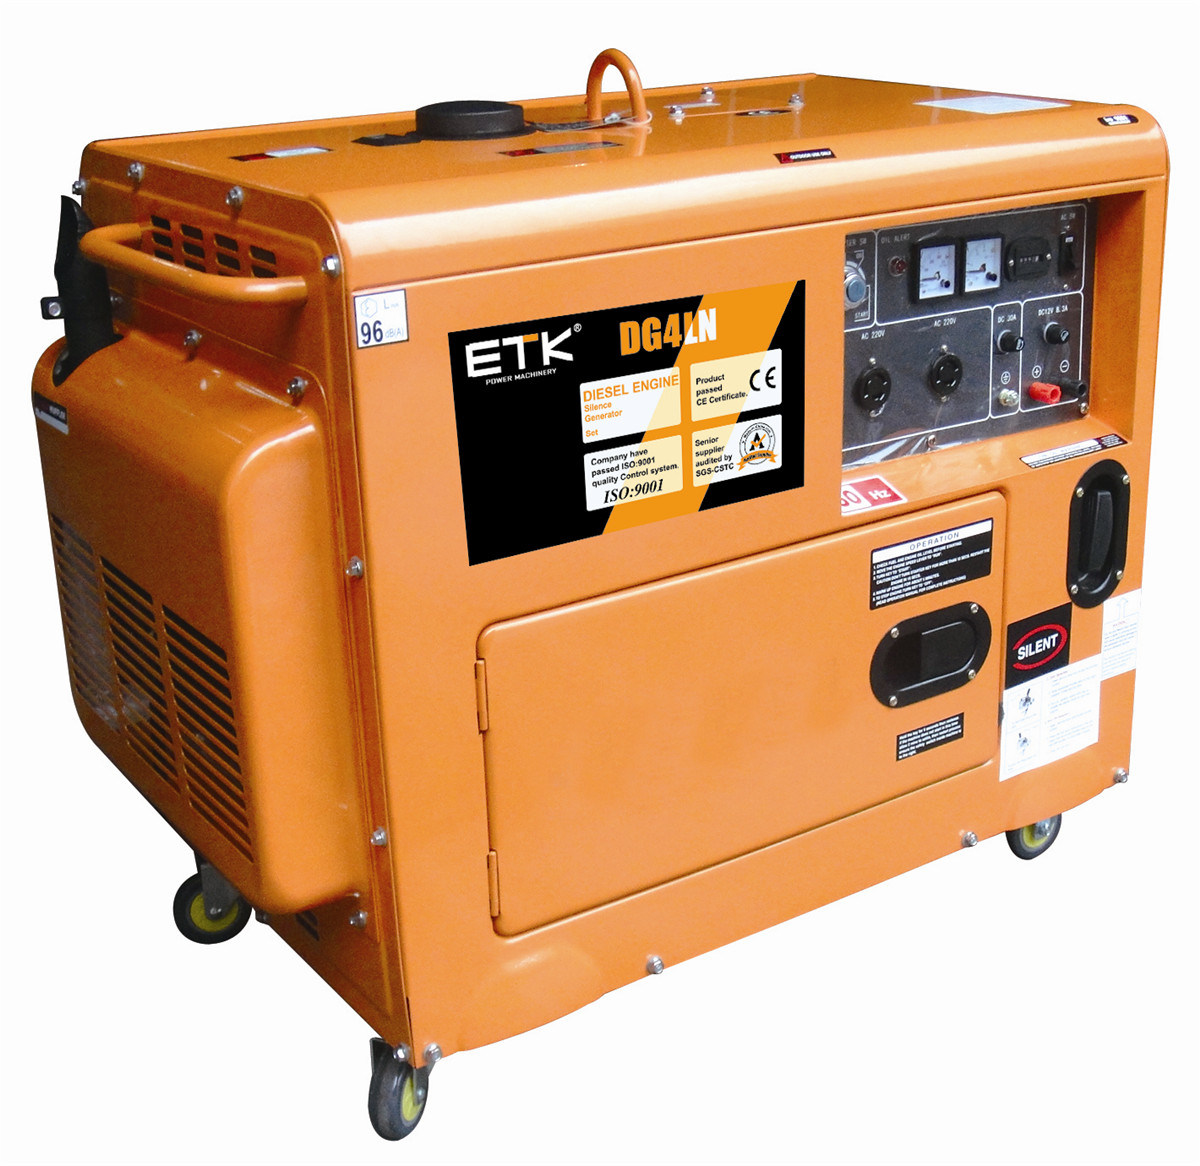 Diesel Silent Generator with CE and ISO9001 (DG6LN)